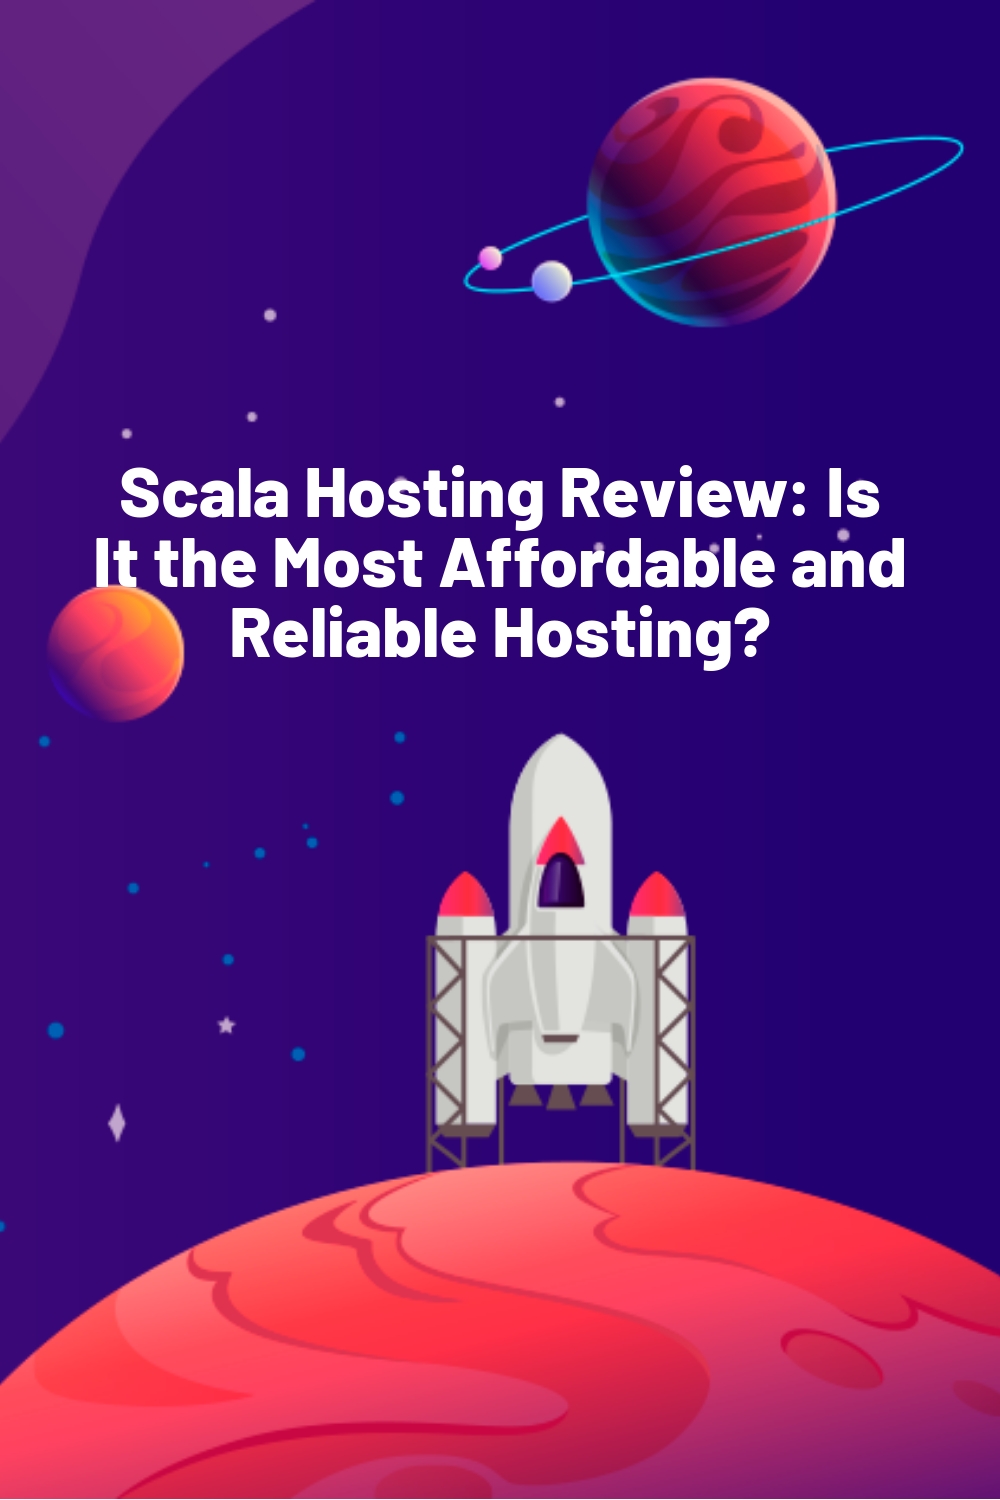 Scala Hosting Review: Is It the Most Affordable and Reliable Hosting?